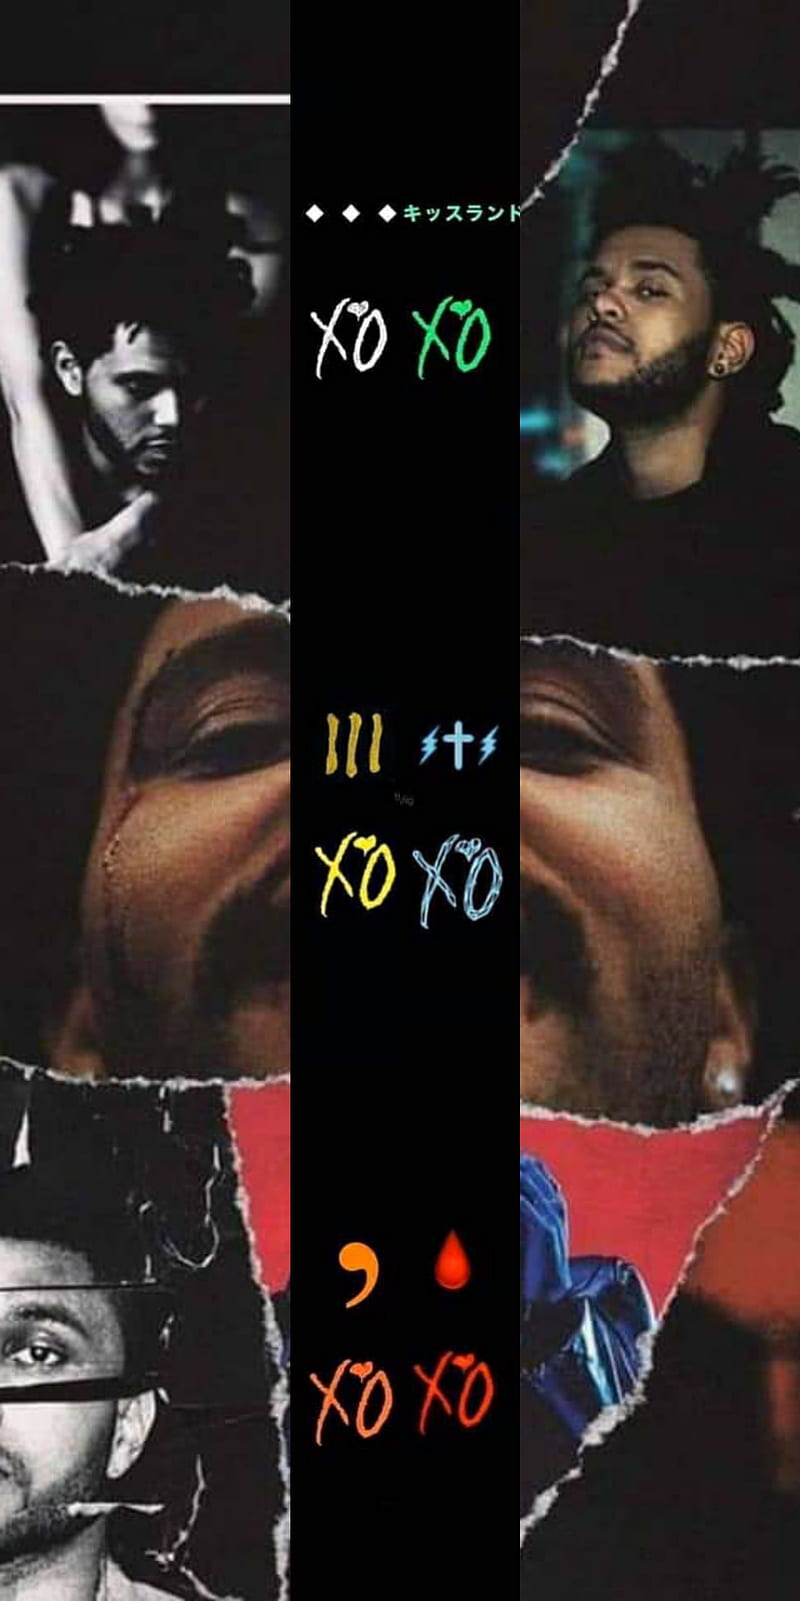 Weeknd Albums, able, kiss land, starboy, the weeknd, trilogy, HD phone wallpaper